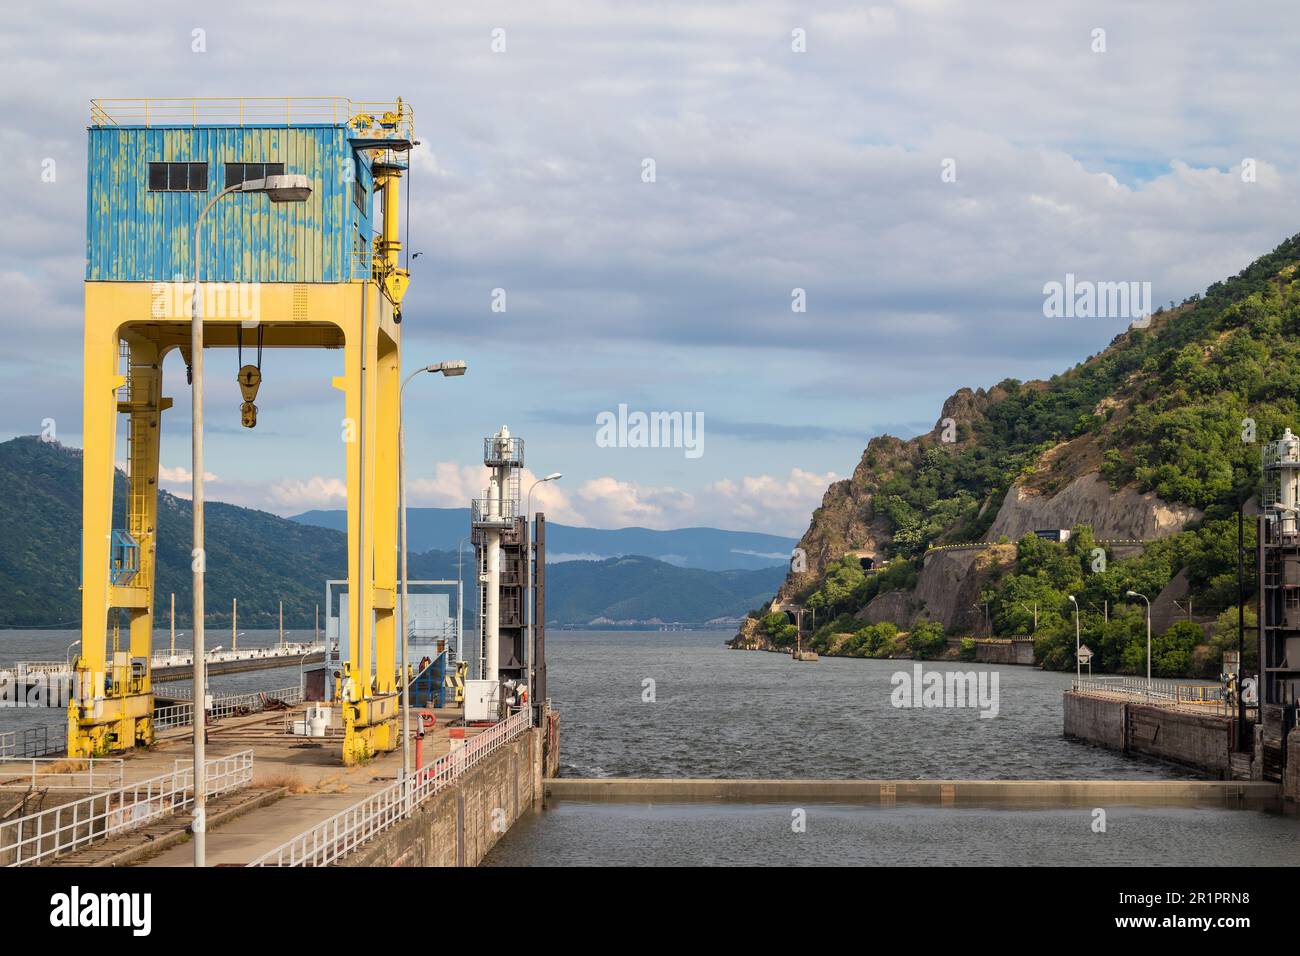 The locks at Iron Gate Gorge on the Danube between Serbia and Romania. Also supplies Hydro-electric power to the region. Stock Photo